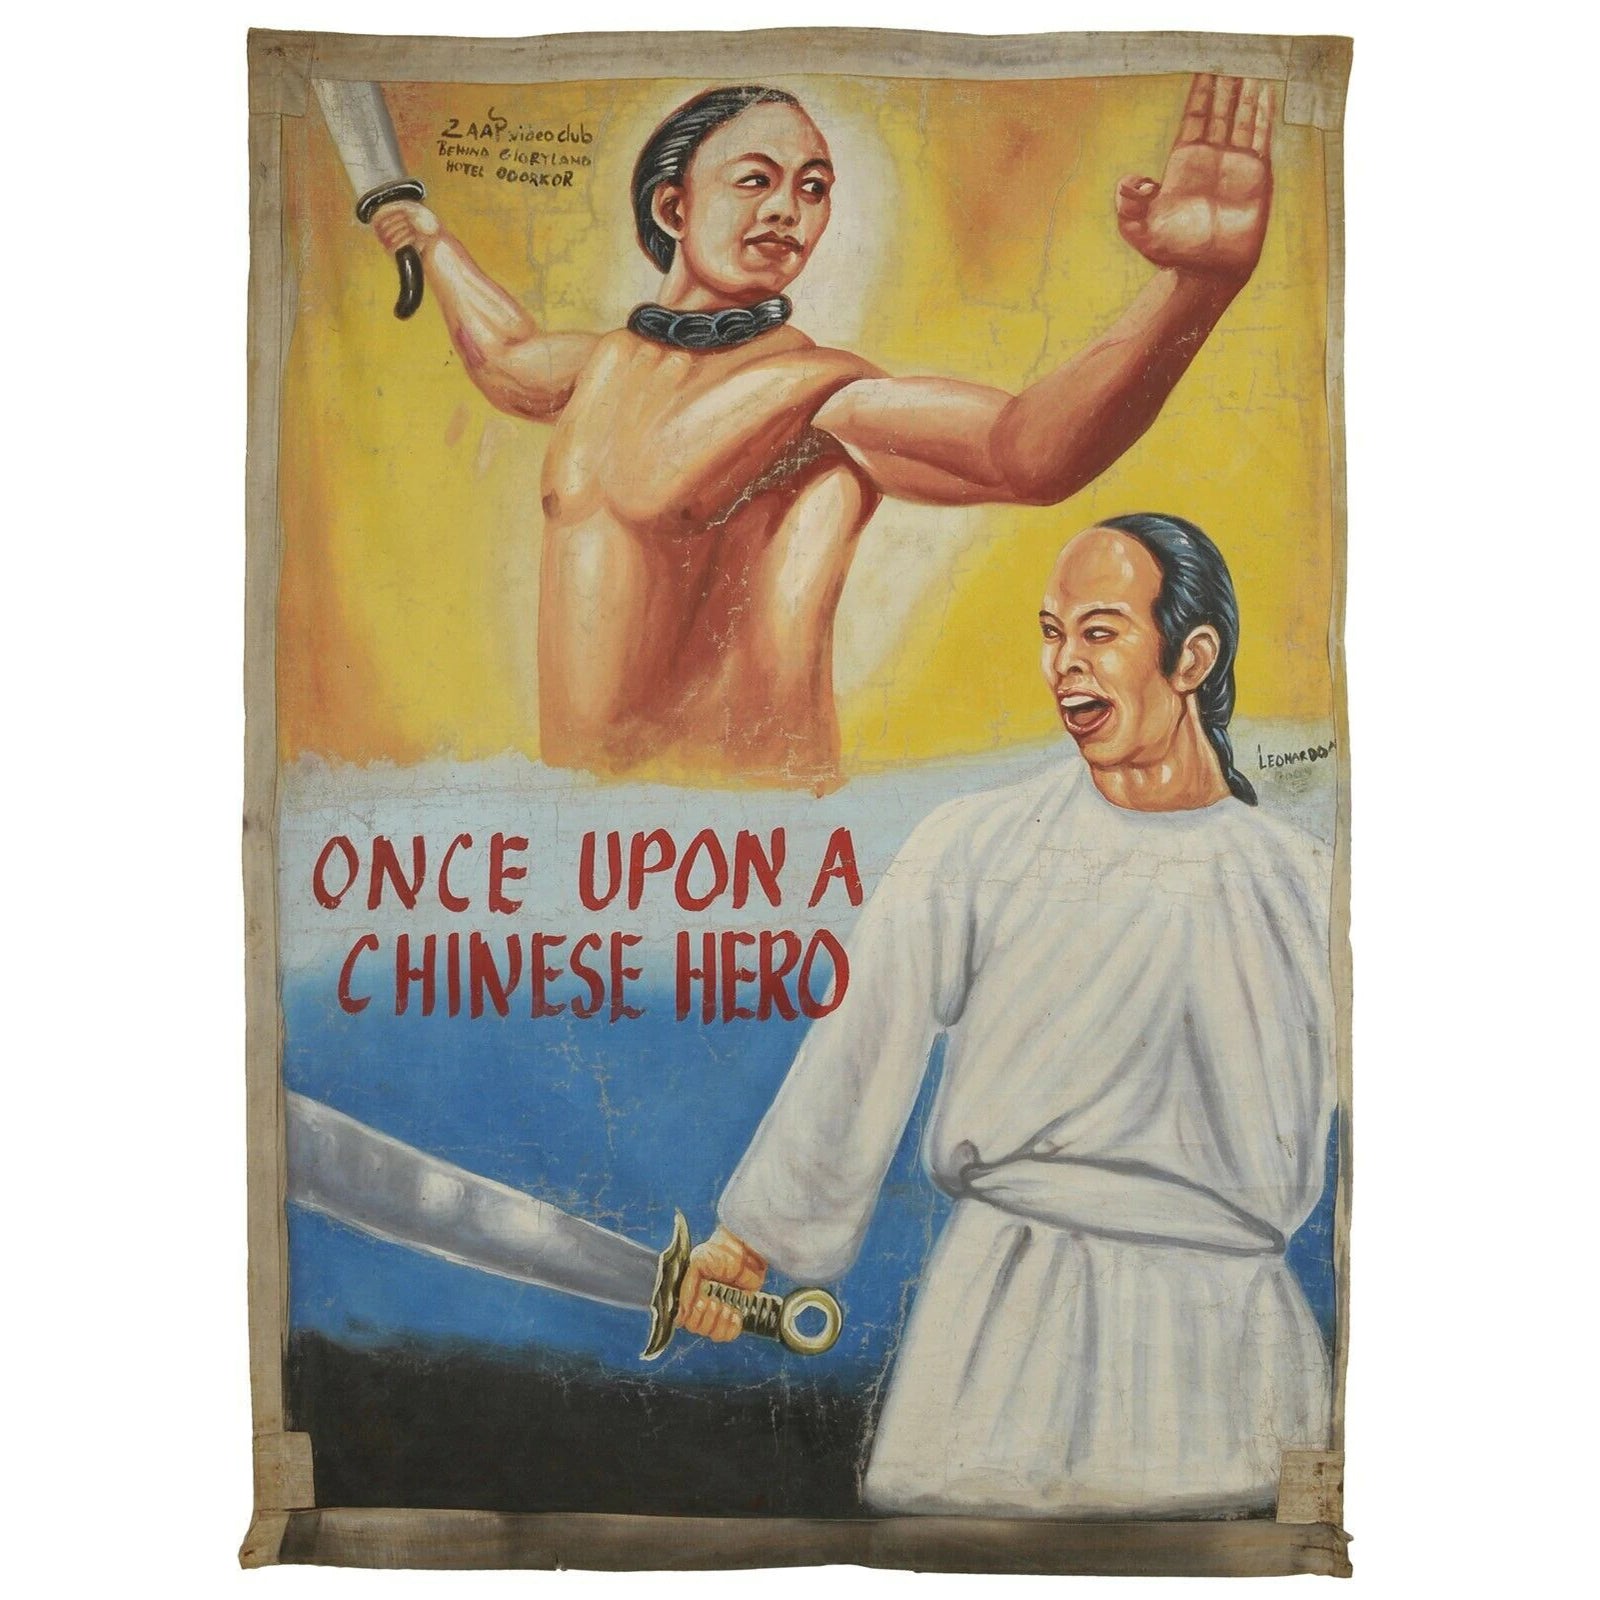 Poster Ghana Hand Painting African art movie cinema Once Upon A Chinese Hero - Tribalgh